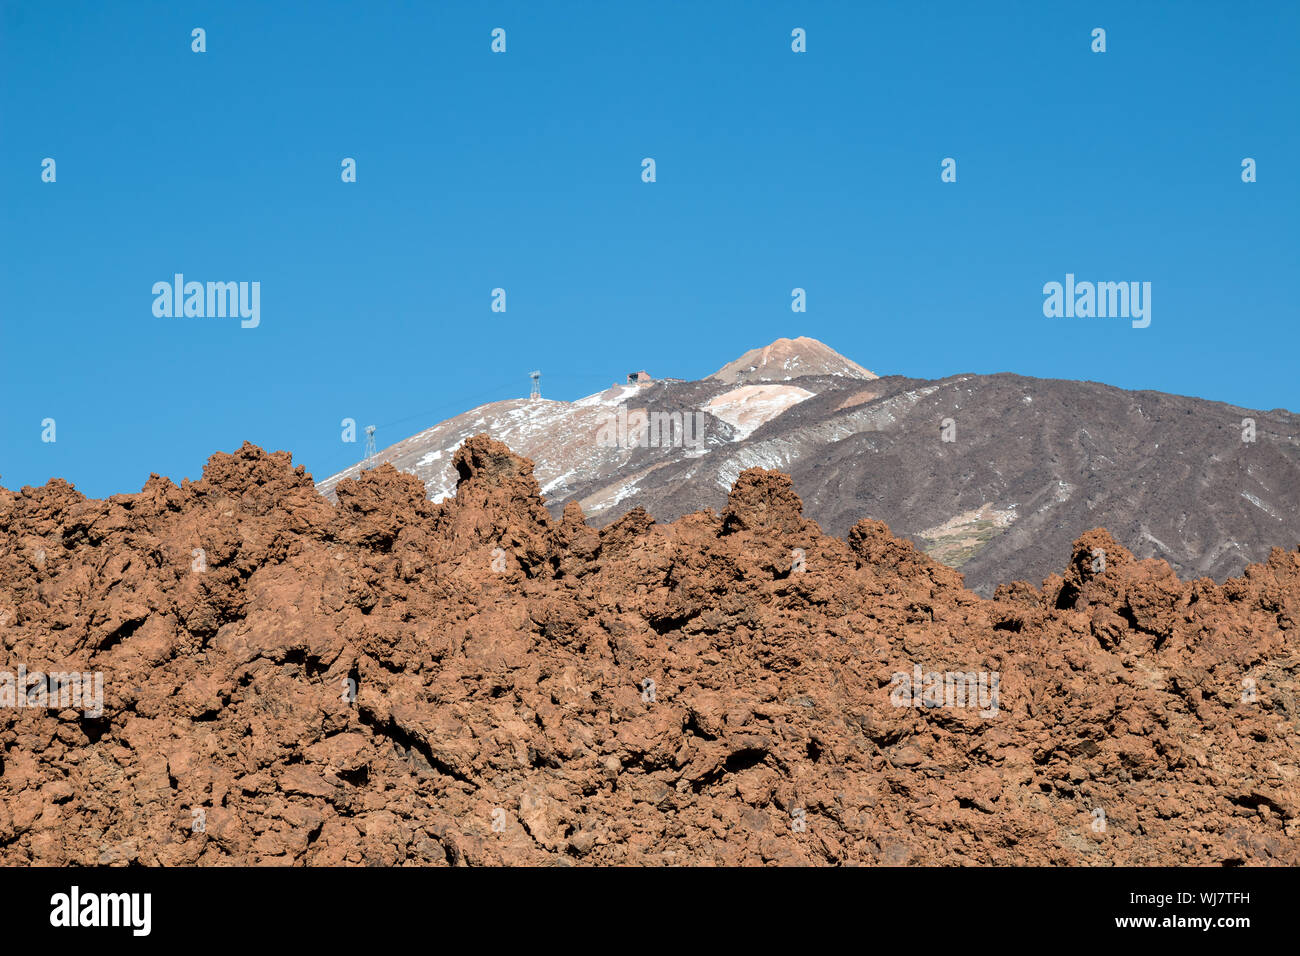 Light brown color of a wall made of sharp lava stones. In the background mountain and the peak of Pico del Teide. Bright blue sky. Tenerife, Canary Is Stock Photo